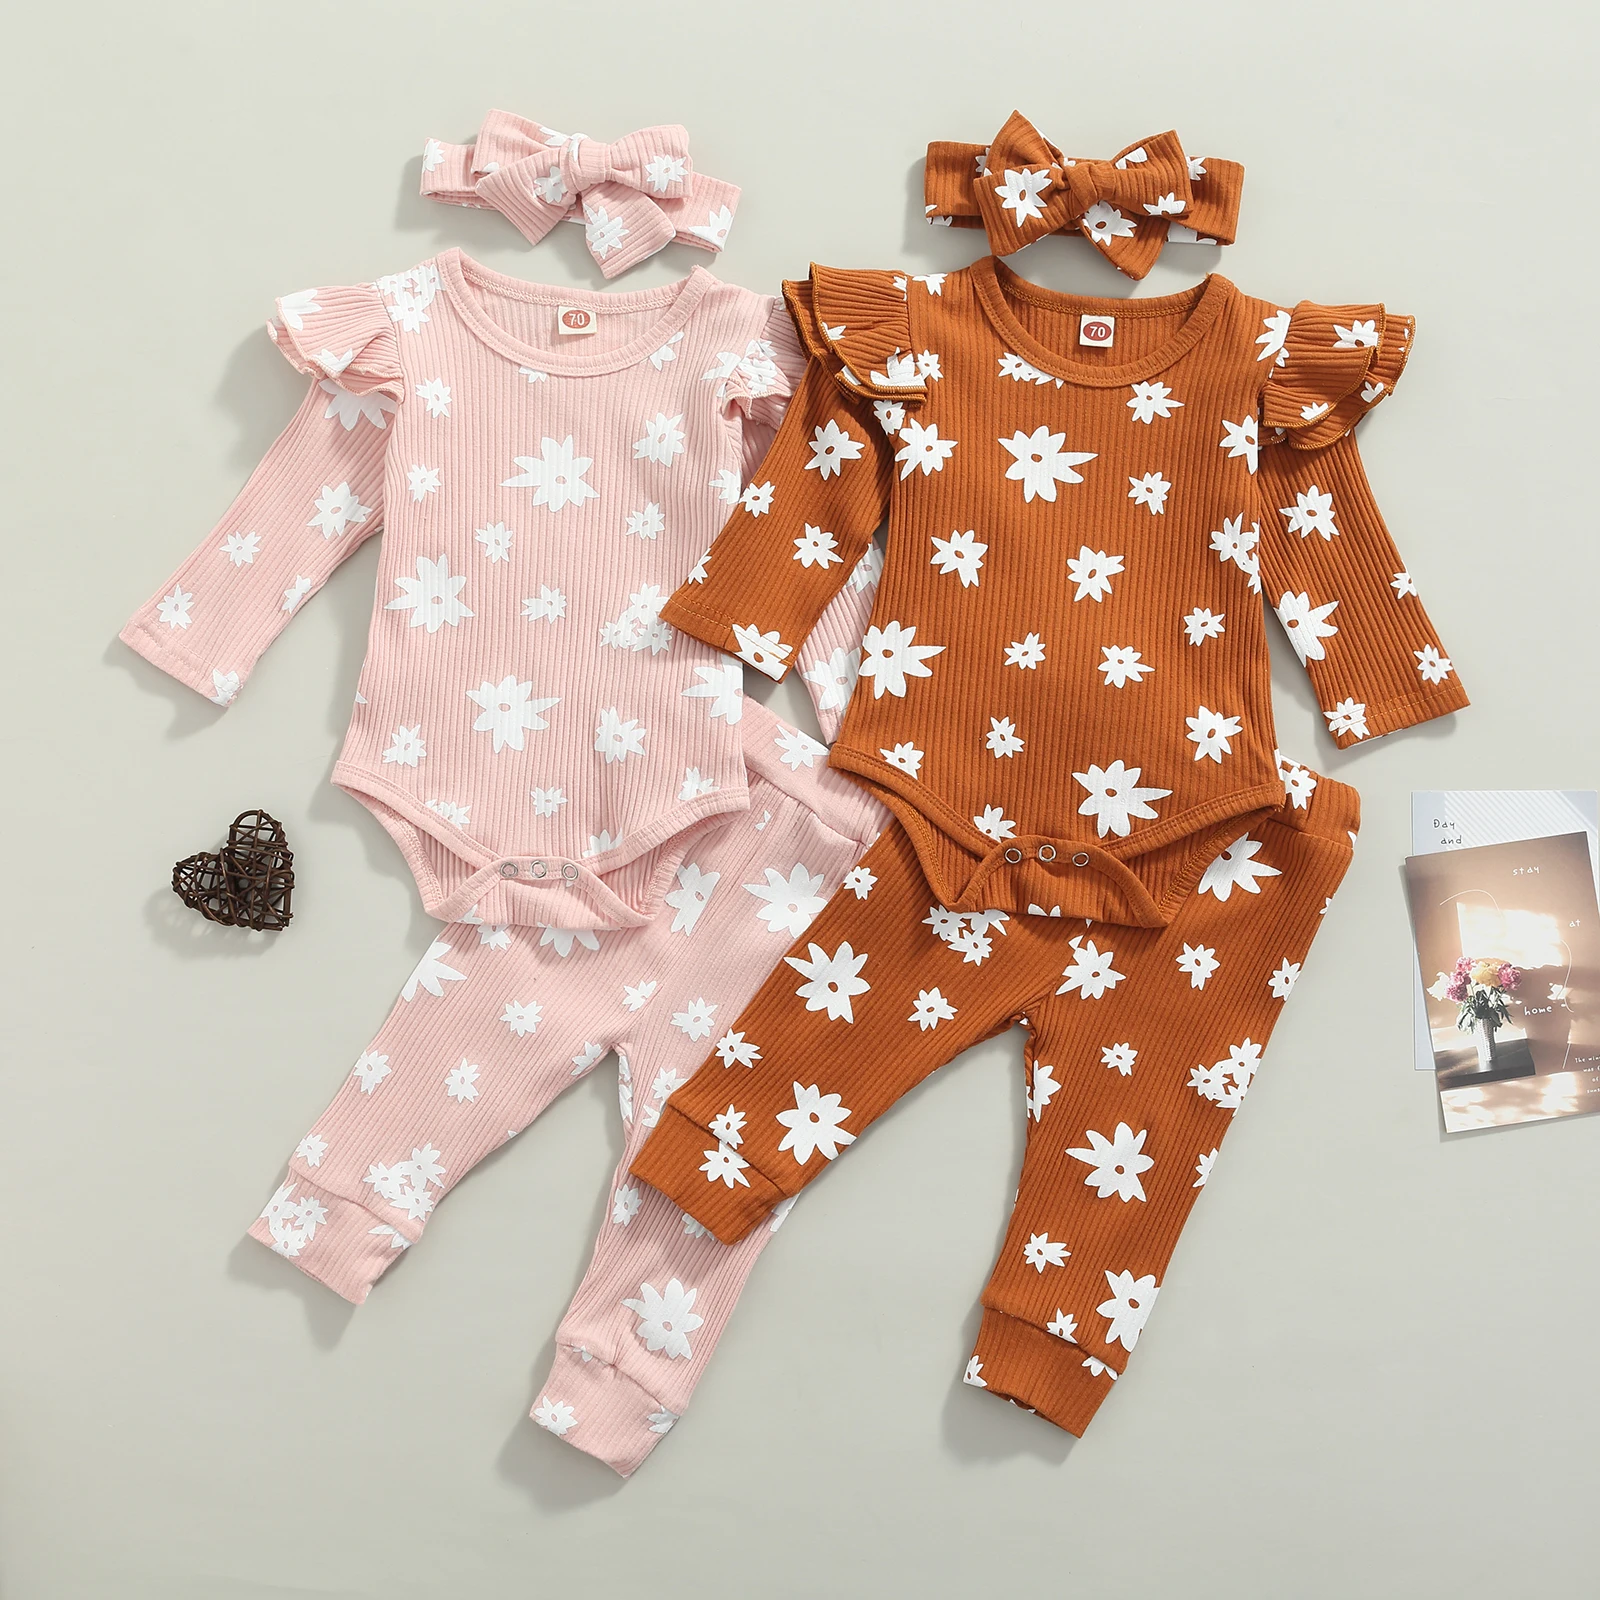 

Ma&Baby 0-18m Newborn Infant Baby Girls Clothes Set Knitted Outfits Flower Long Sleeve Romper Pants Autumn Clothing Outfits DD40